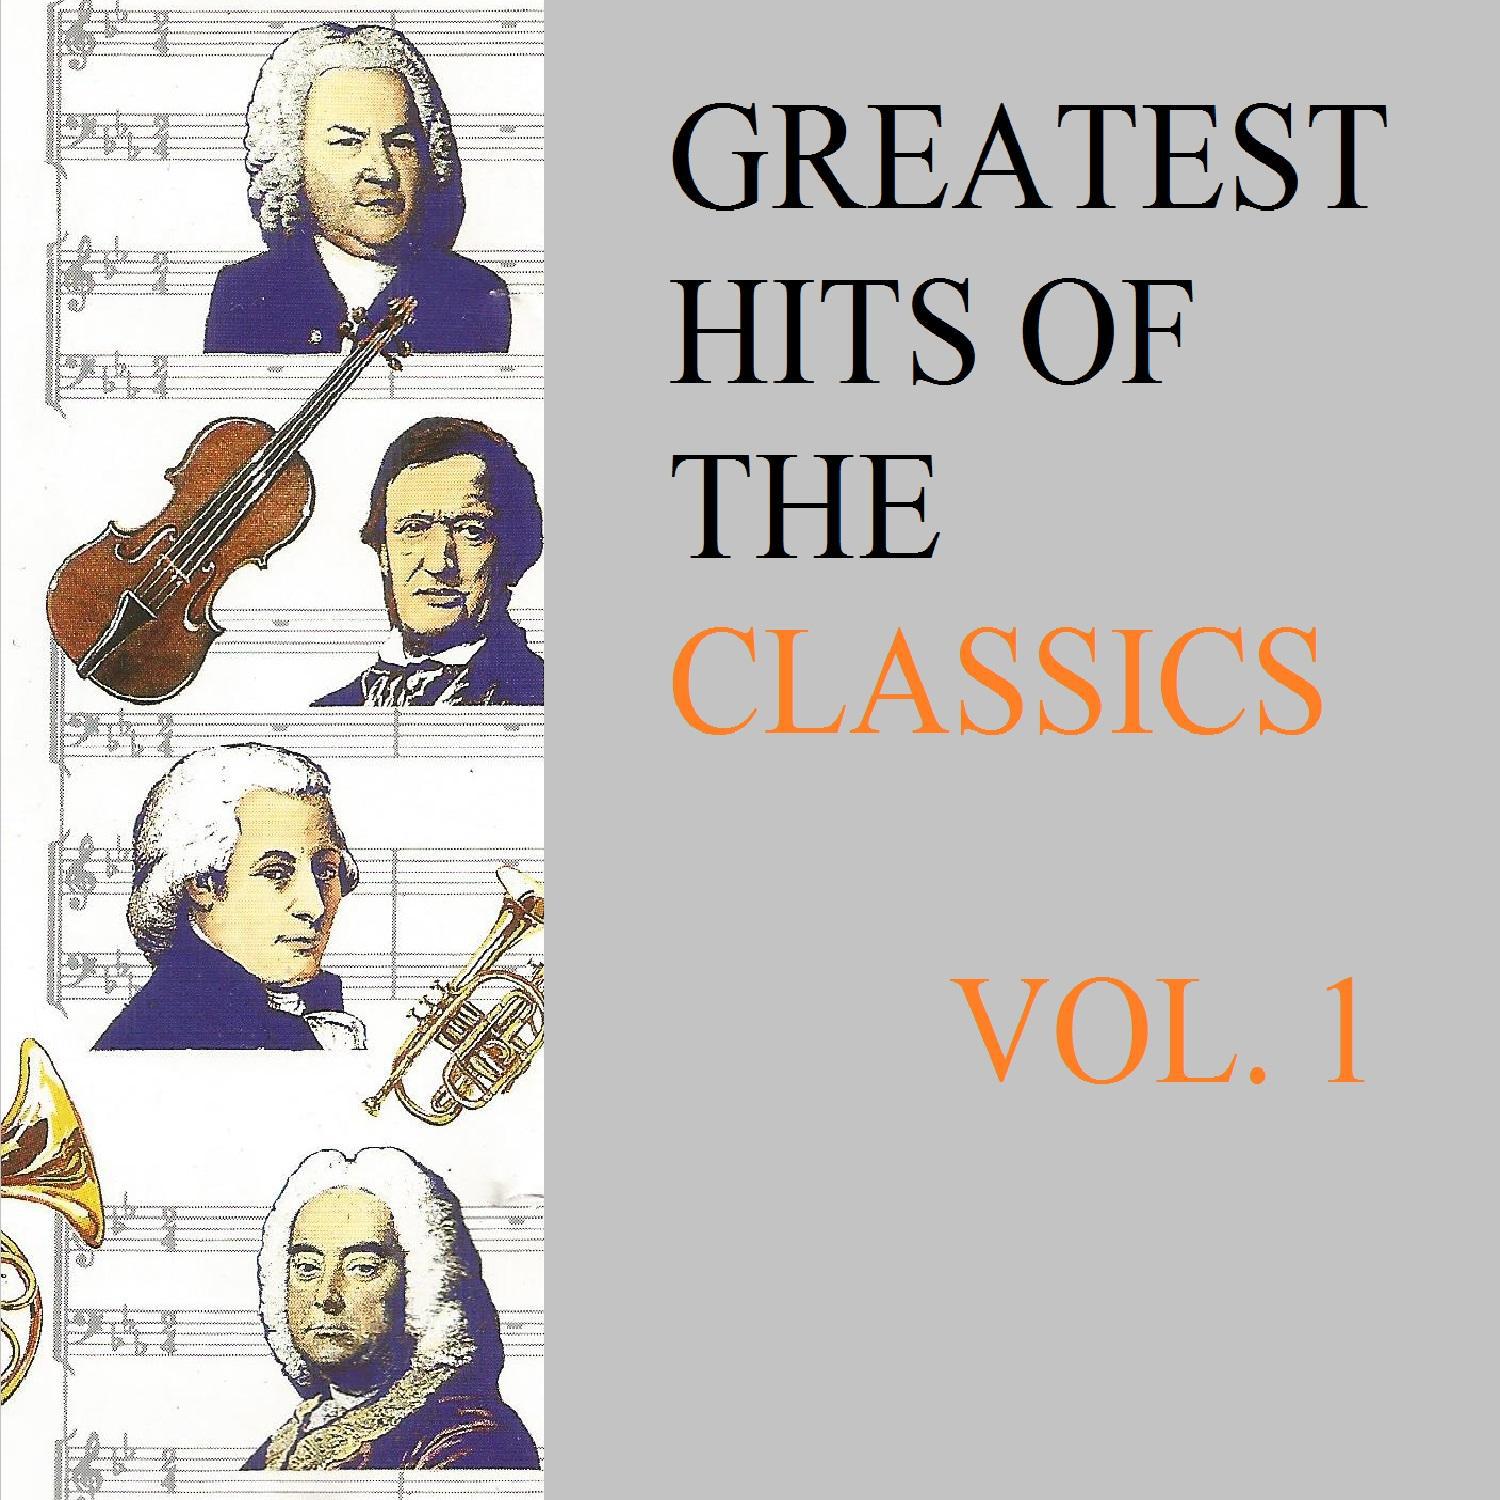 Greatest Hits Of The Classics Vol. 1